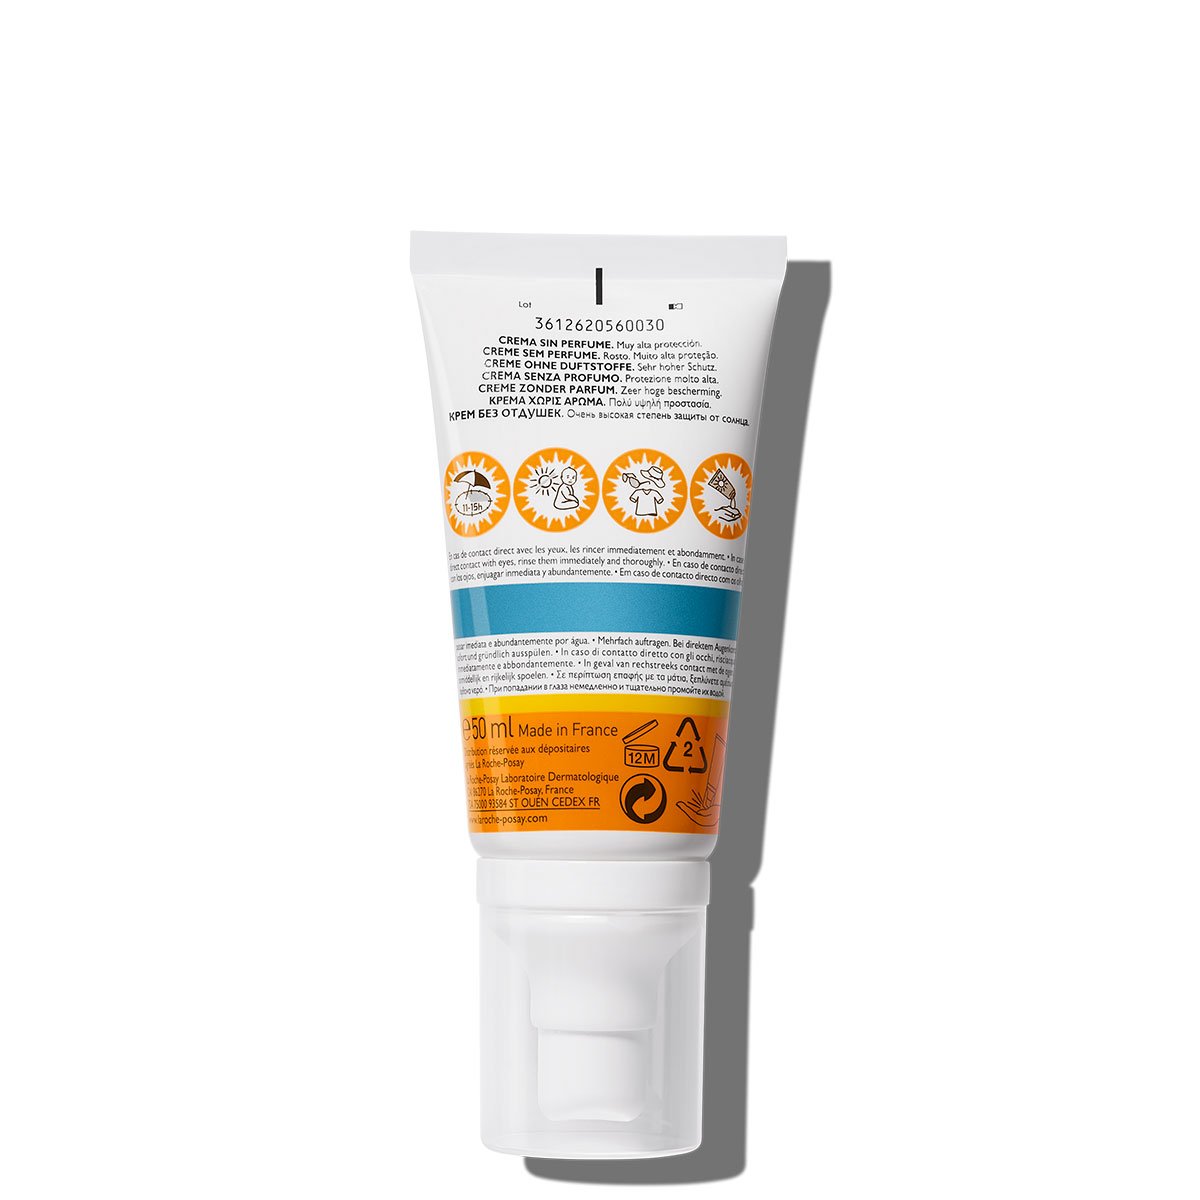 La Roche Posay ProductPage Sun Anthelios Ultra Face Spf50 50ml Fragran